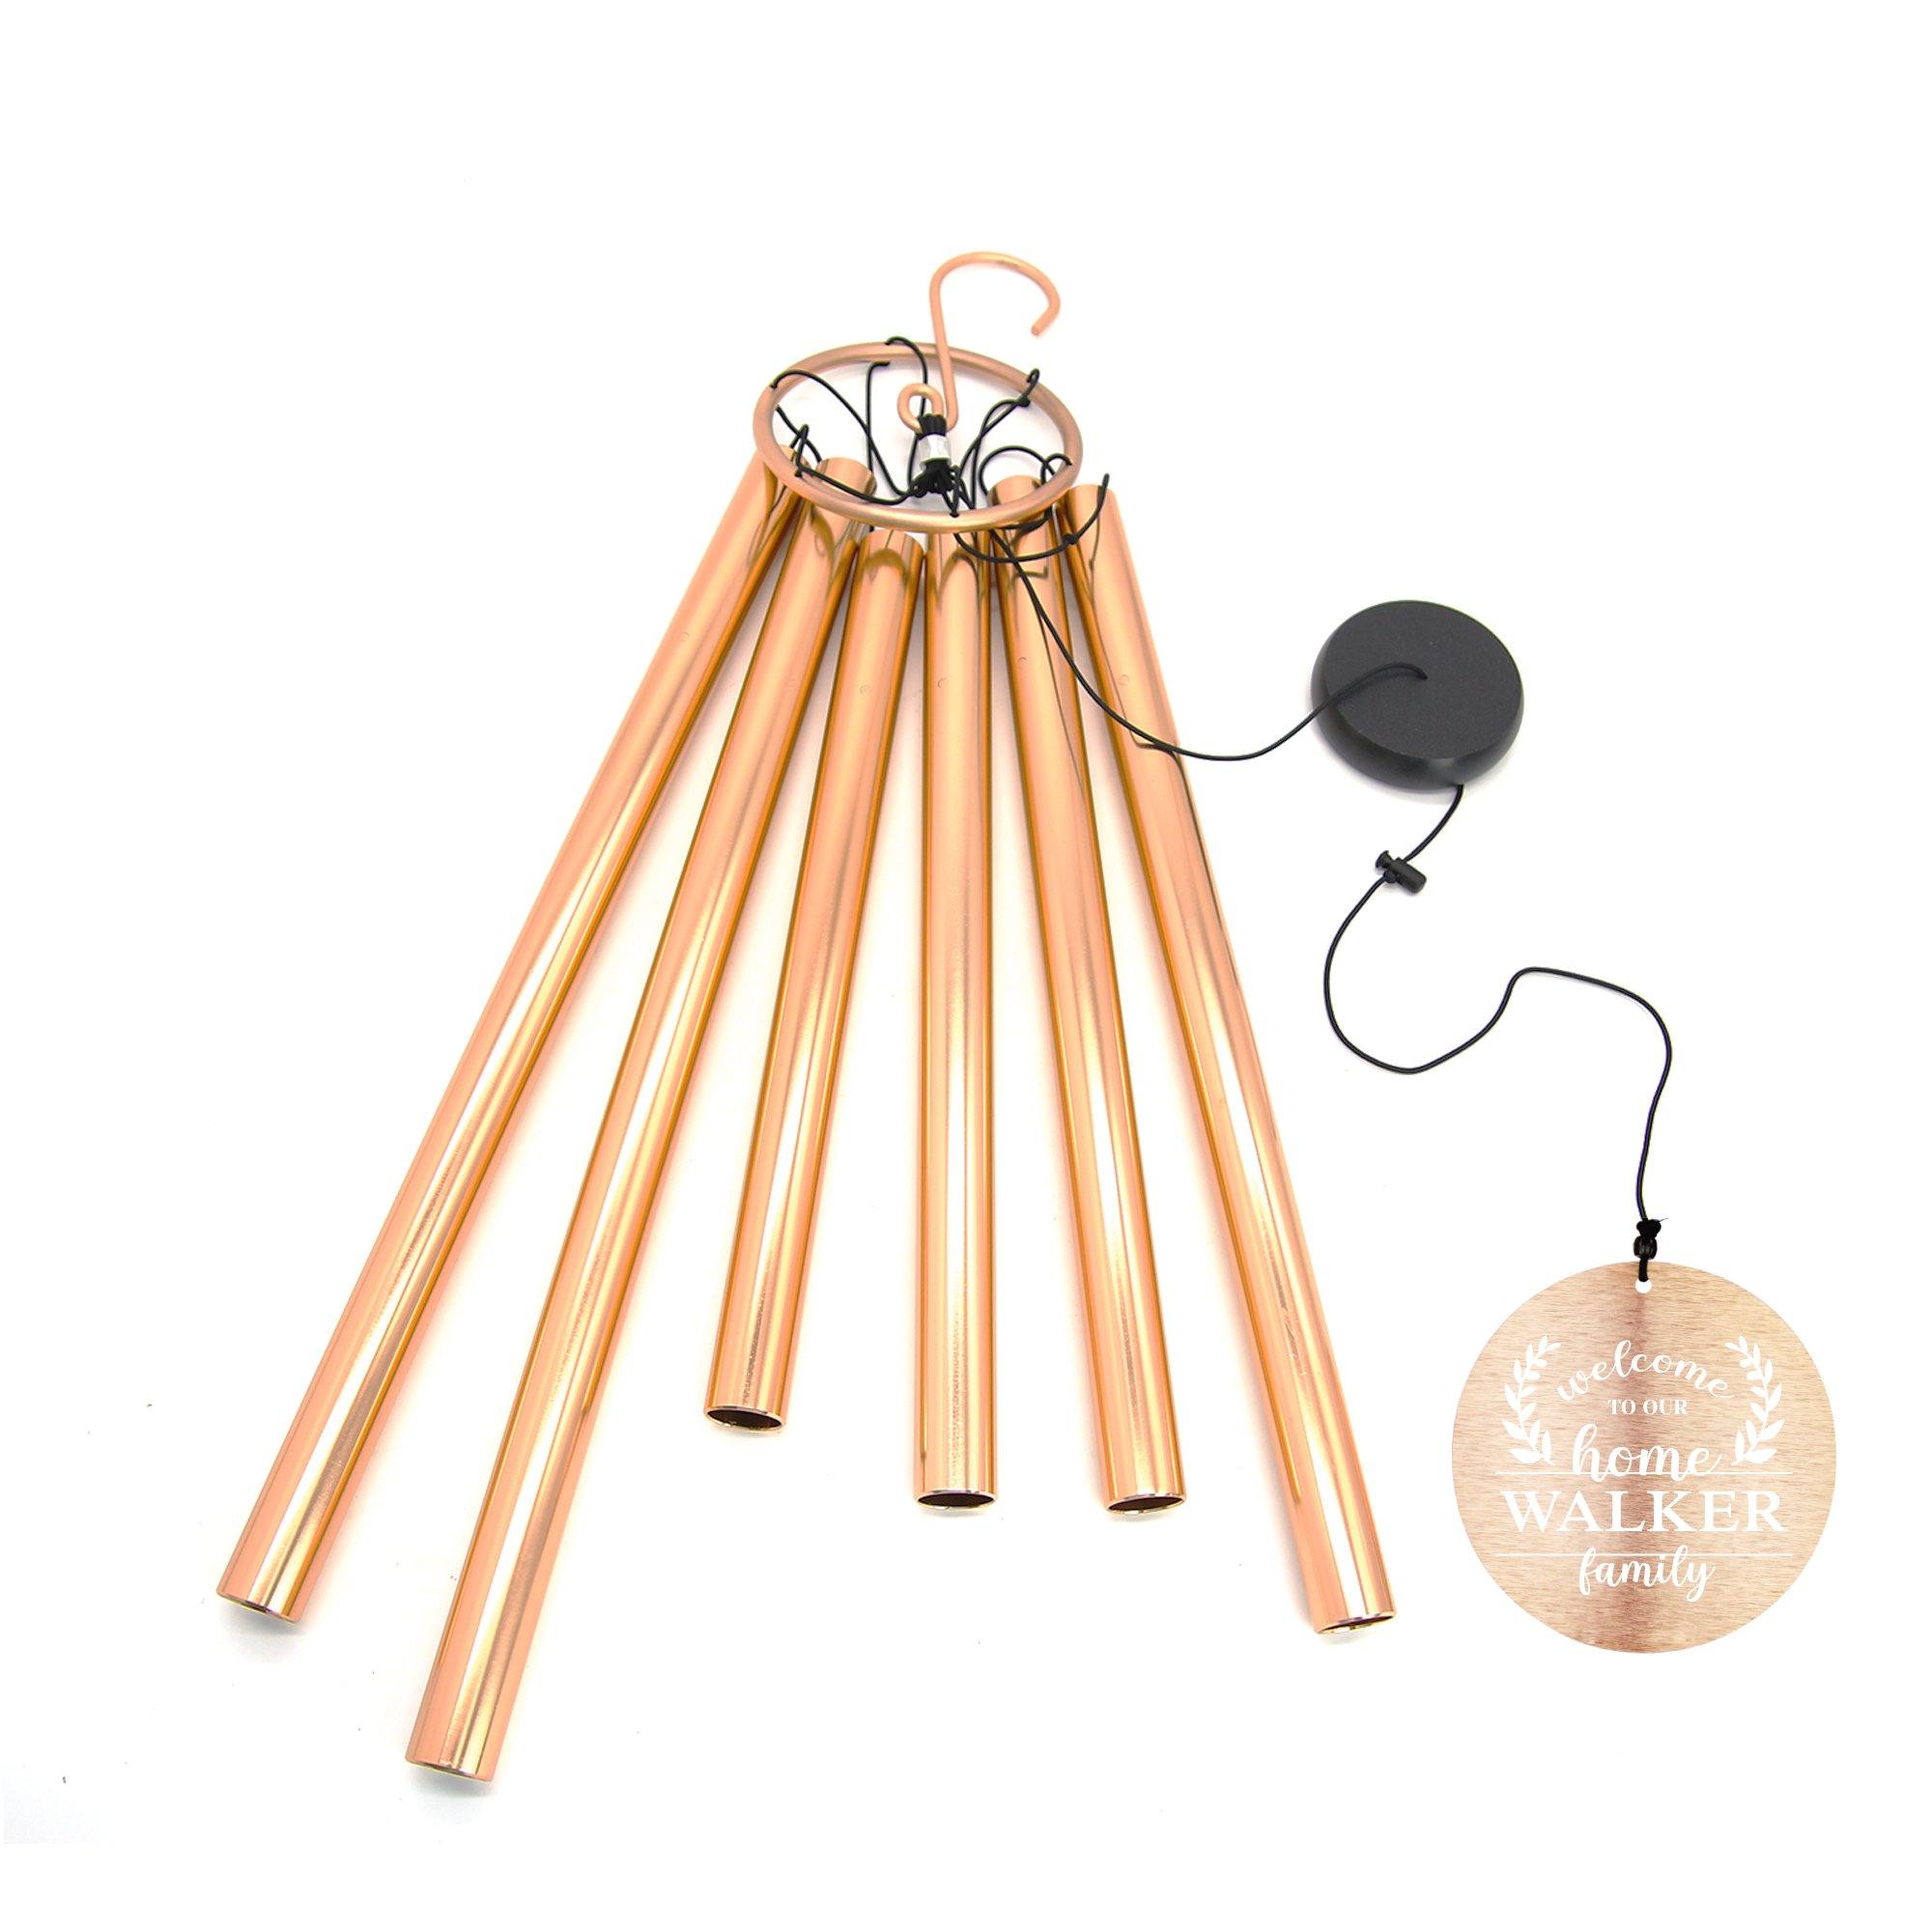 Personalized Gift Wind Chimes-36/45 Inch, 6 Tubes, Rose Gold-Housewarming Gift